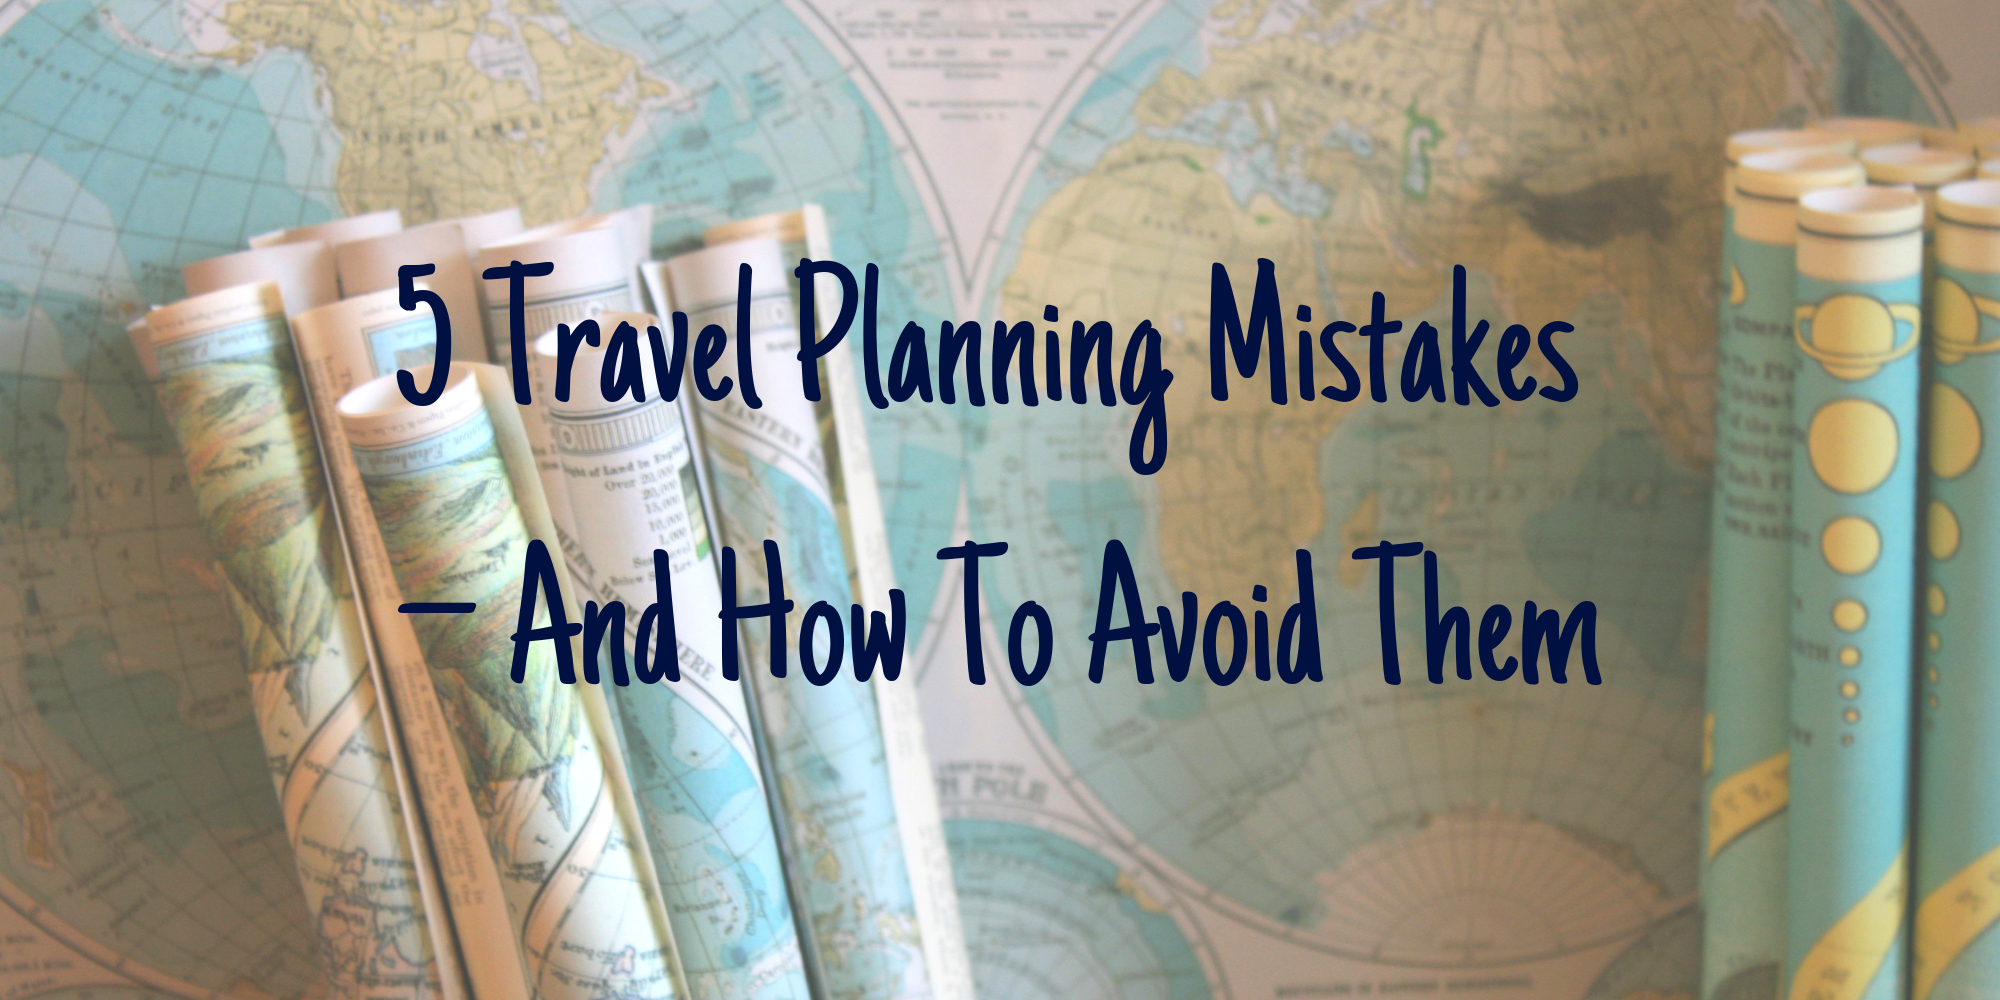 5 Travel Planning Mistakes – And How To Avoid Them